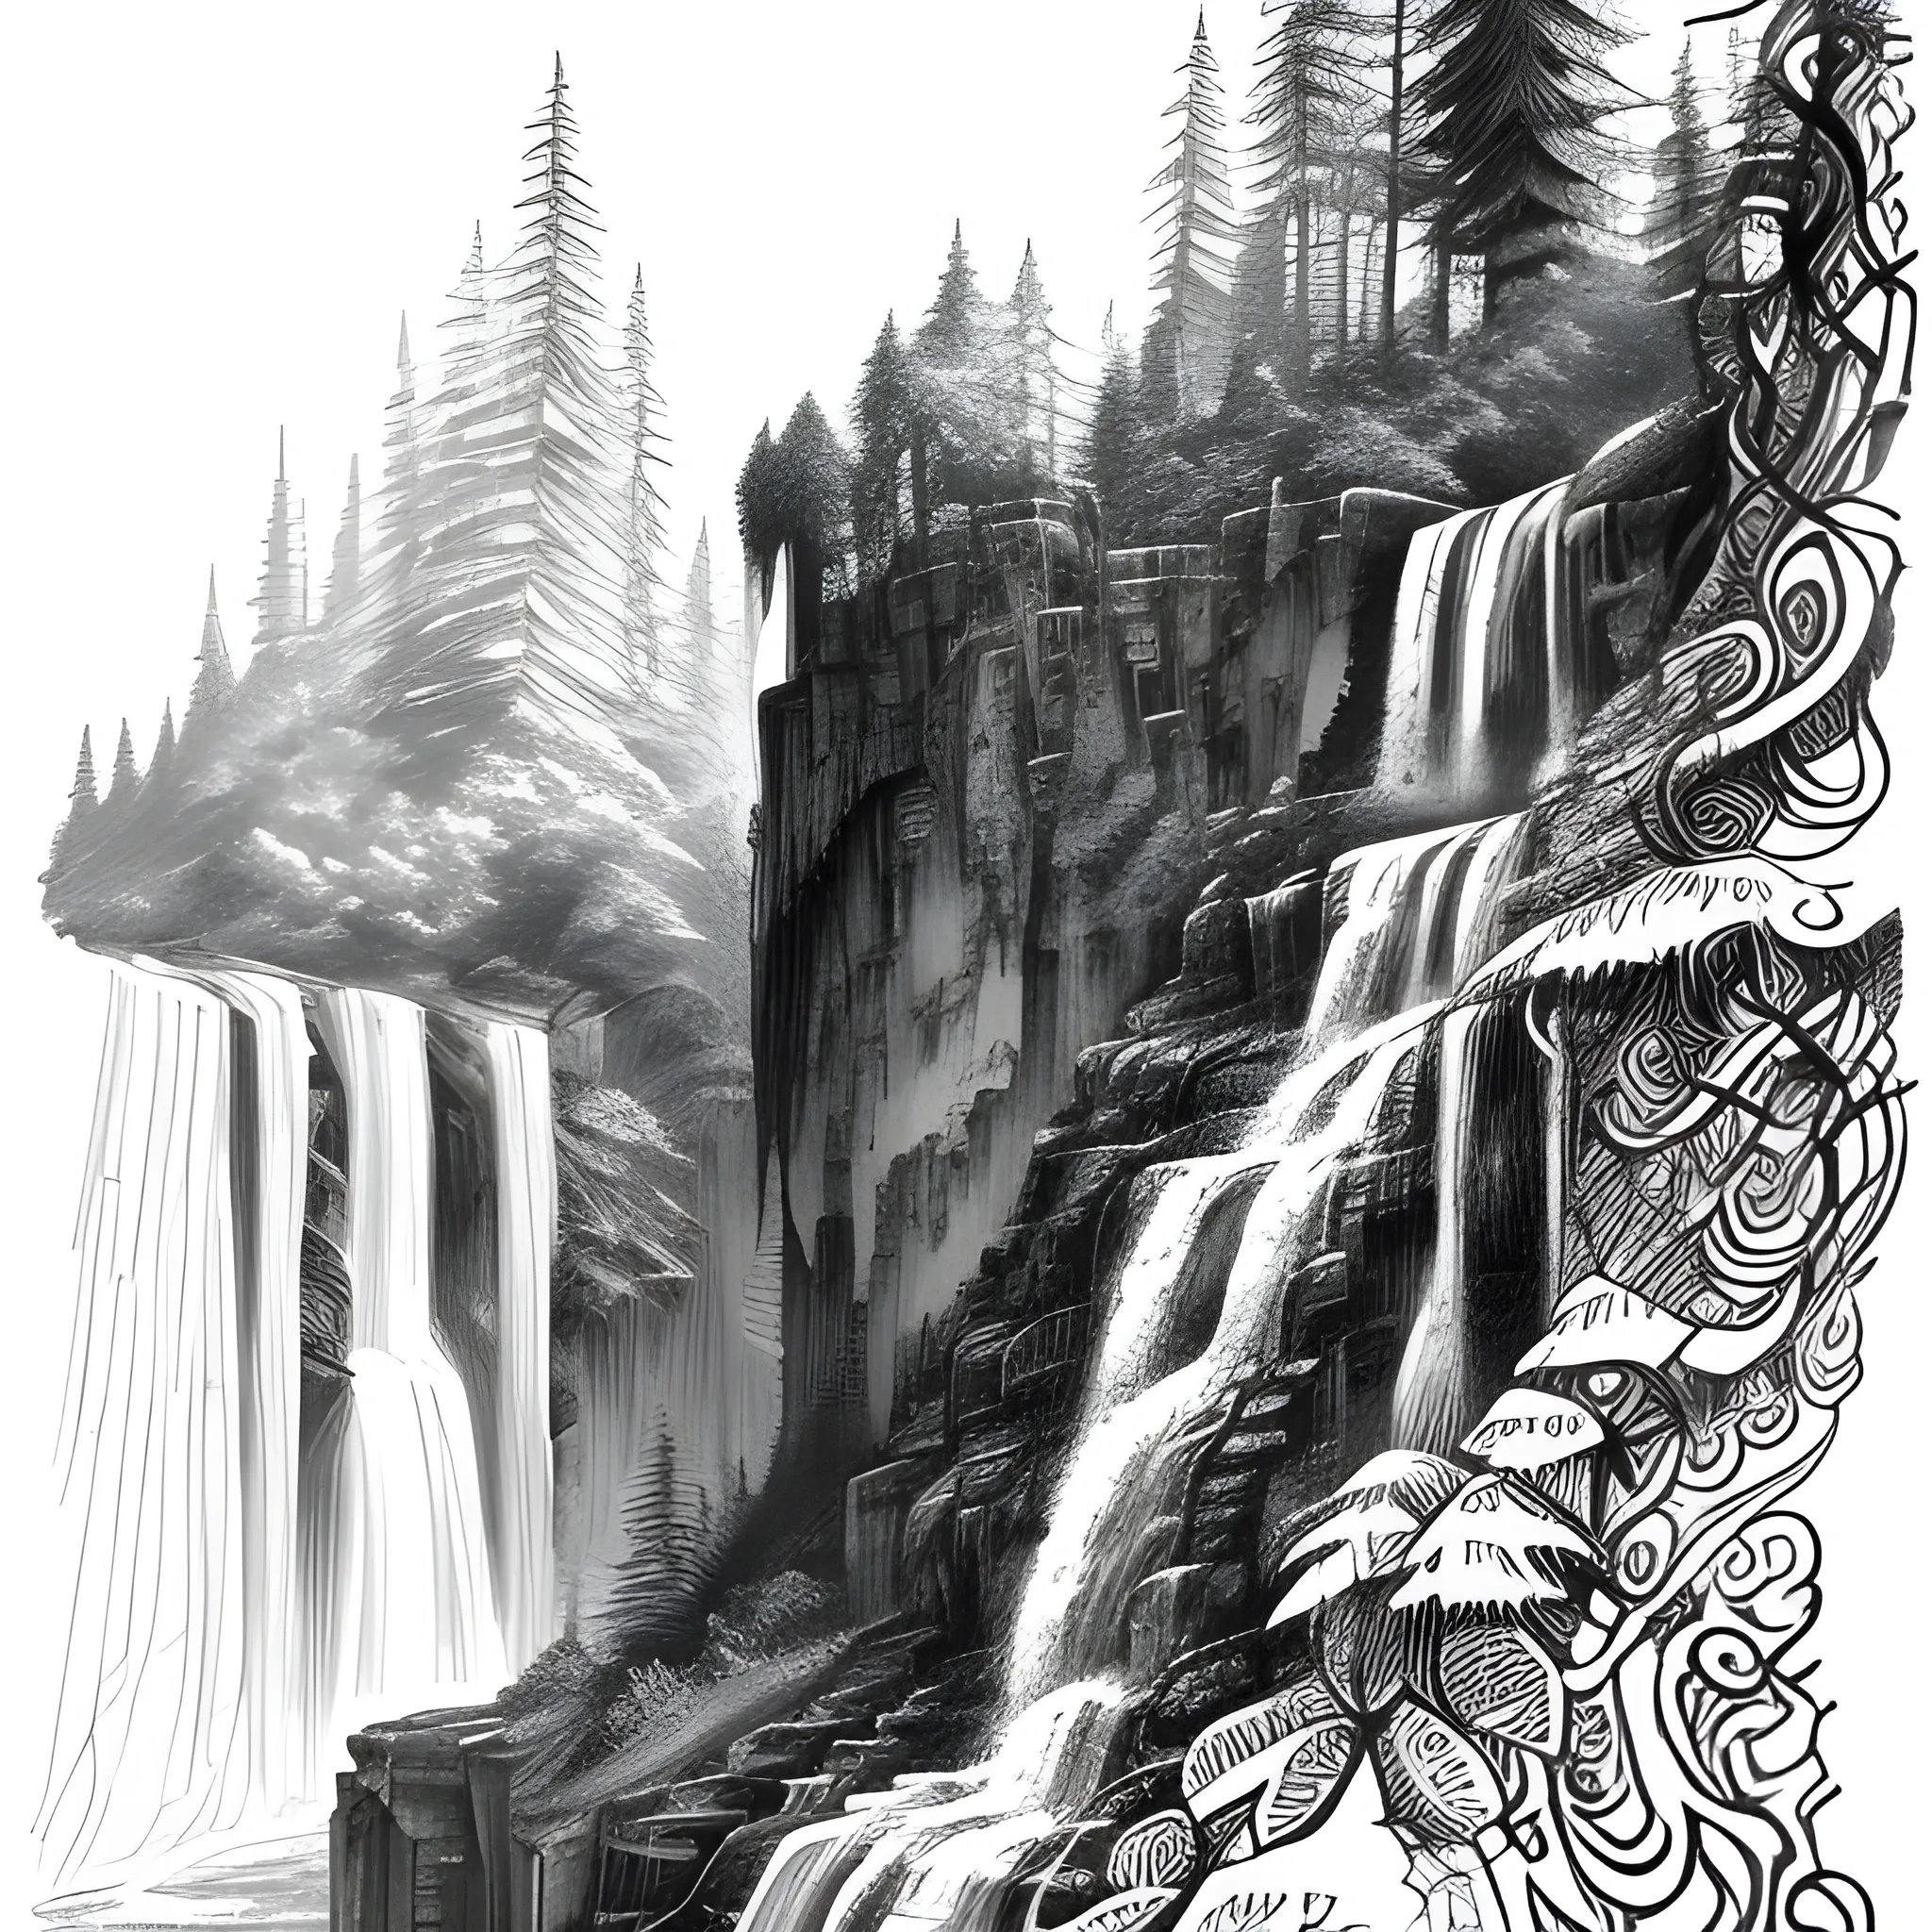 New pencil sketch WATERFALL made by... - Sidana cloth house | Facebook